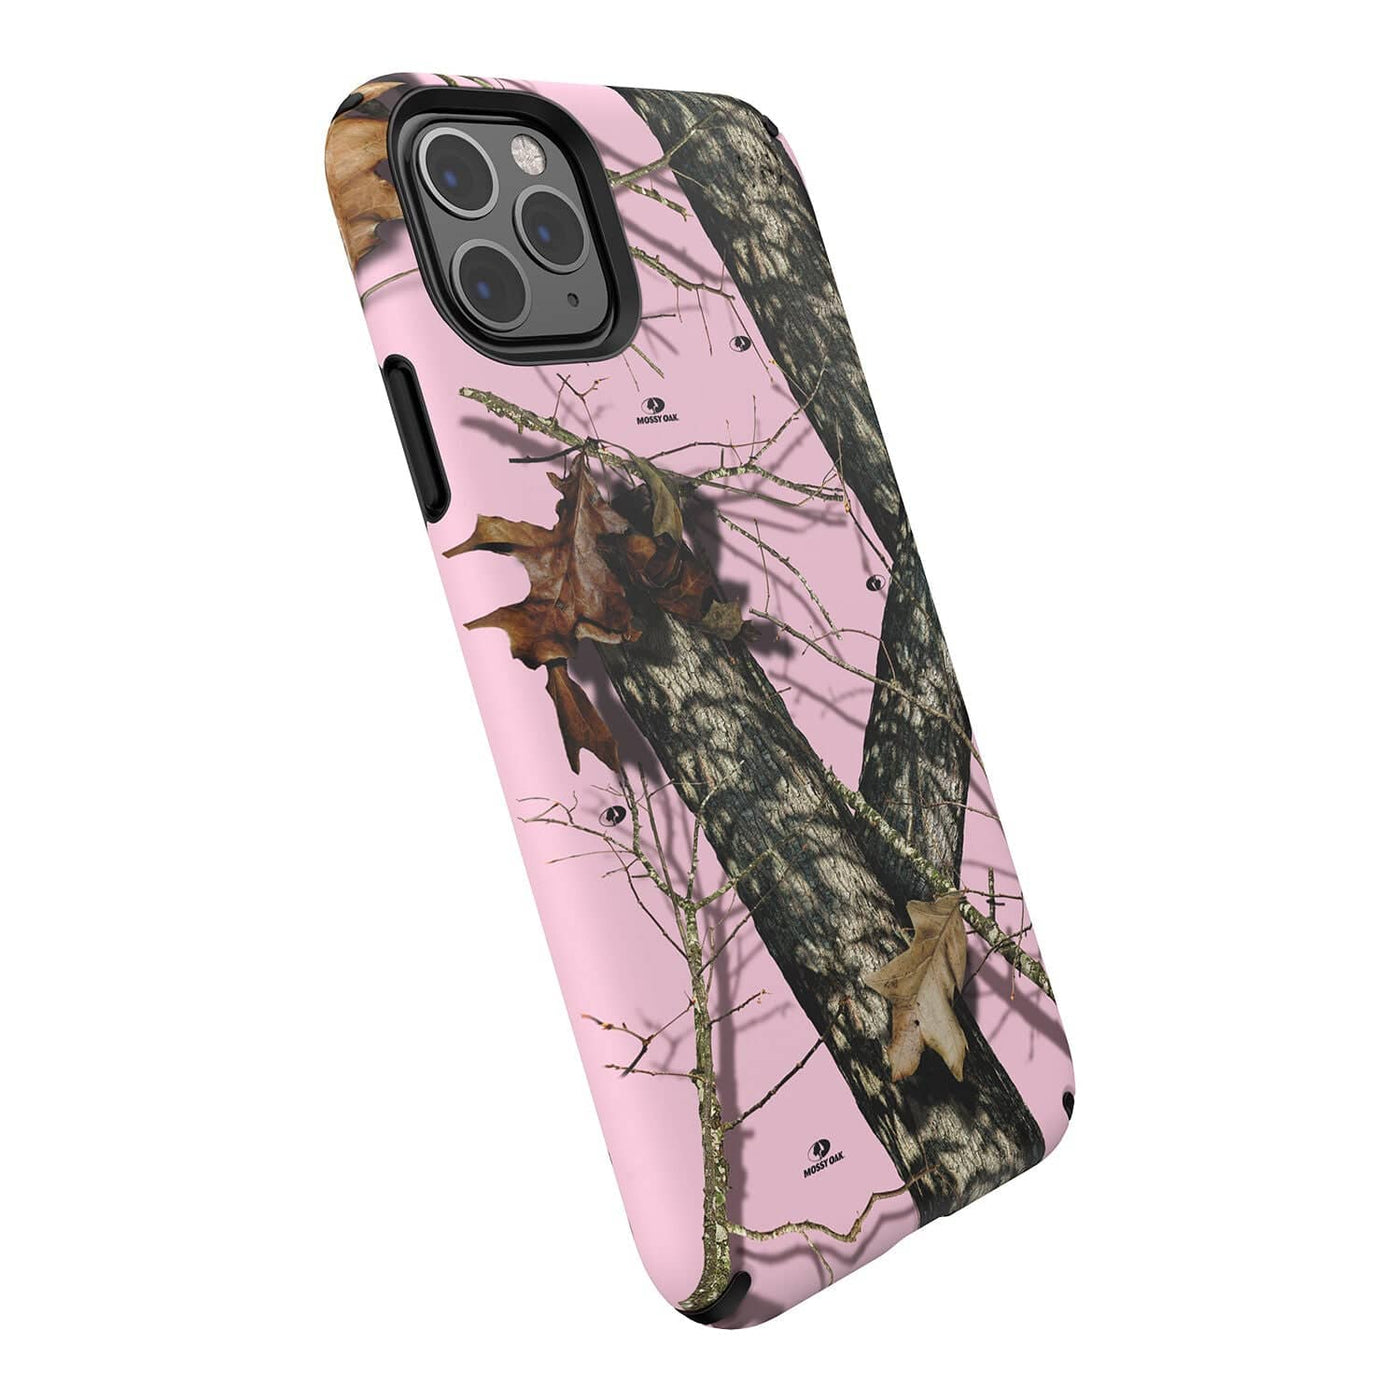 Speck Presidio Inked Mossy Oak Edition iPhone 11 Pro Max Cases Best iPhone  11 Pro Max - $49.99